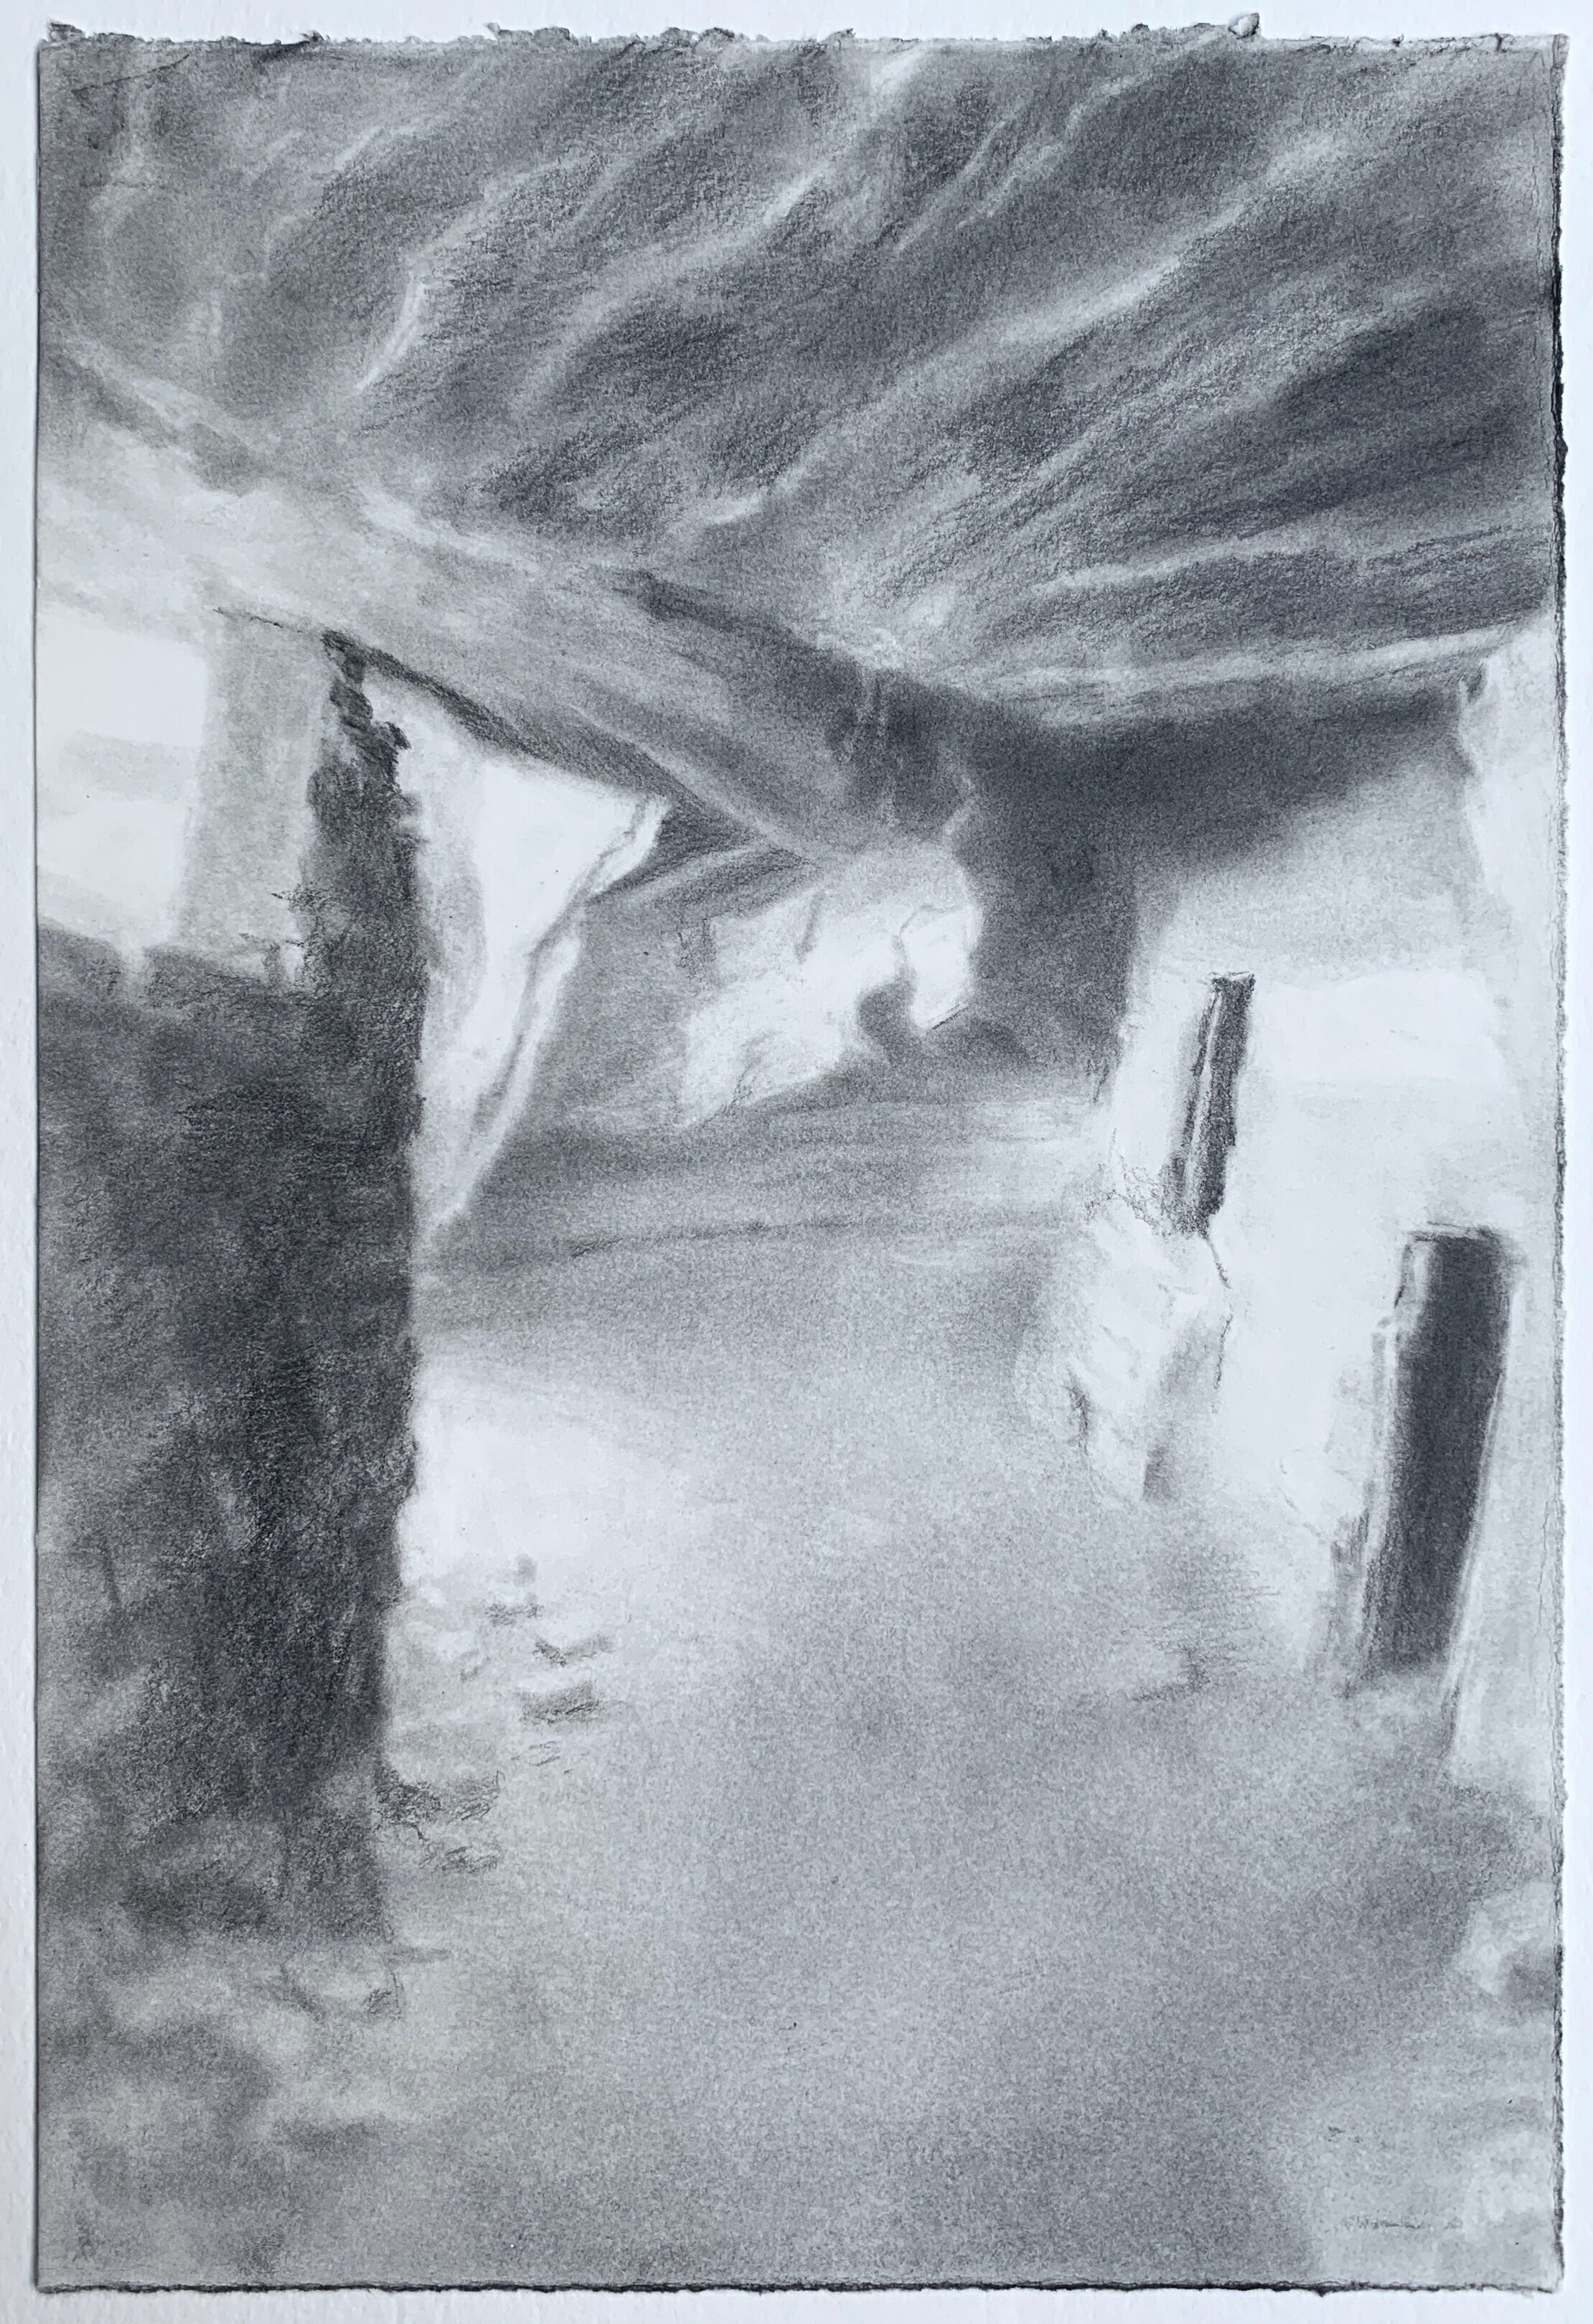   Cliff Dwelling Corridor 2,  2019 graphite on paper, 11 x 7.5 in 